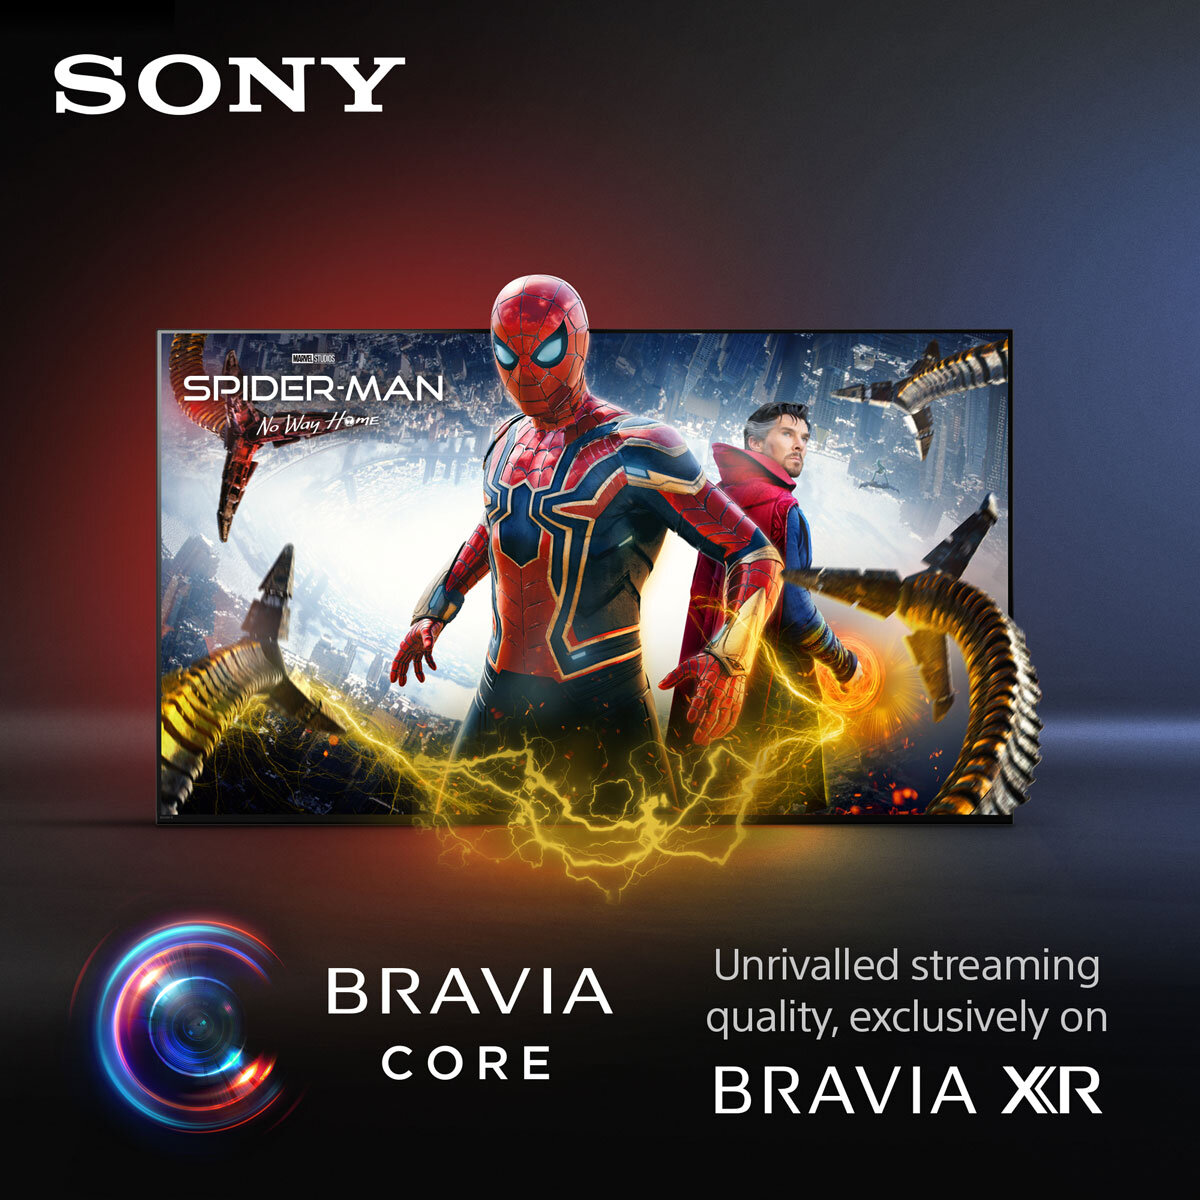 Buy Sony XR42A90K 42 Inch OLED 4K Ultra HD Smart Android TV at Costco.co.uk